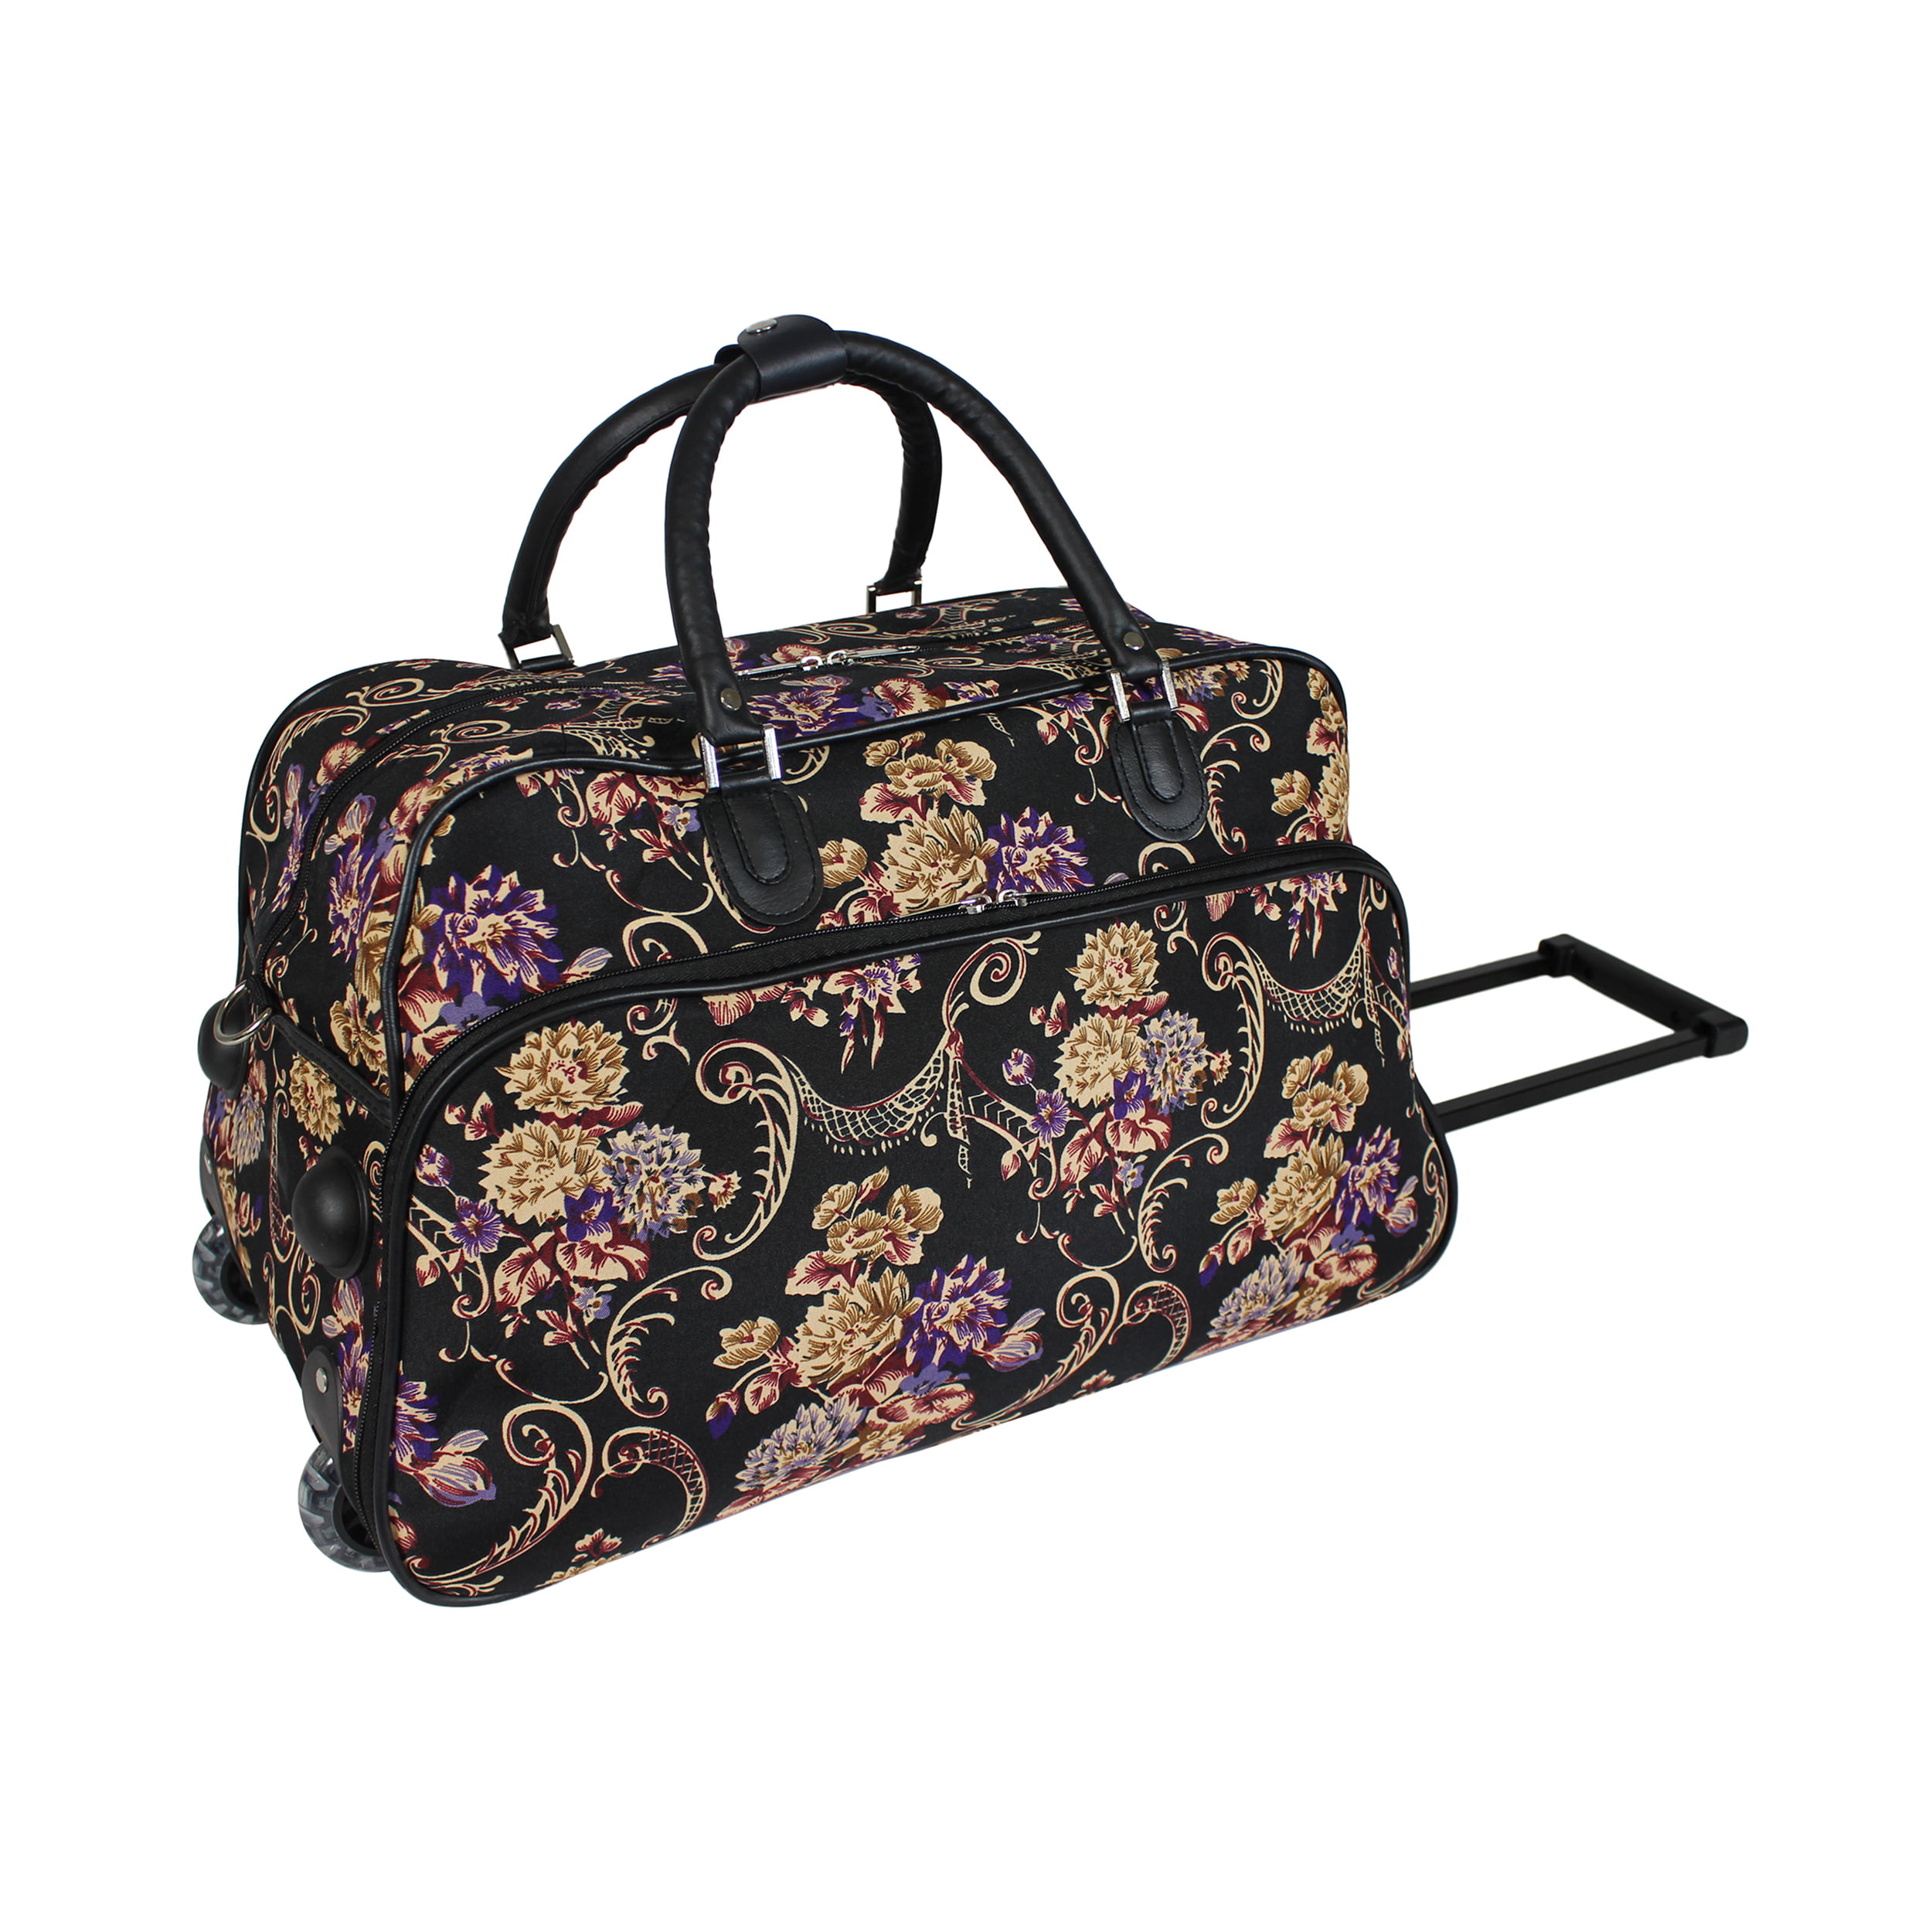 World Traveler Classic Floral 21-in. Carry-On Rolling Duffel Bag - www.neverfullmm.com